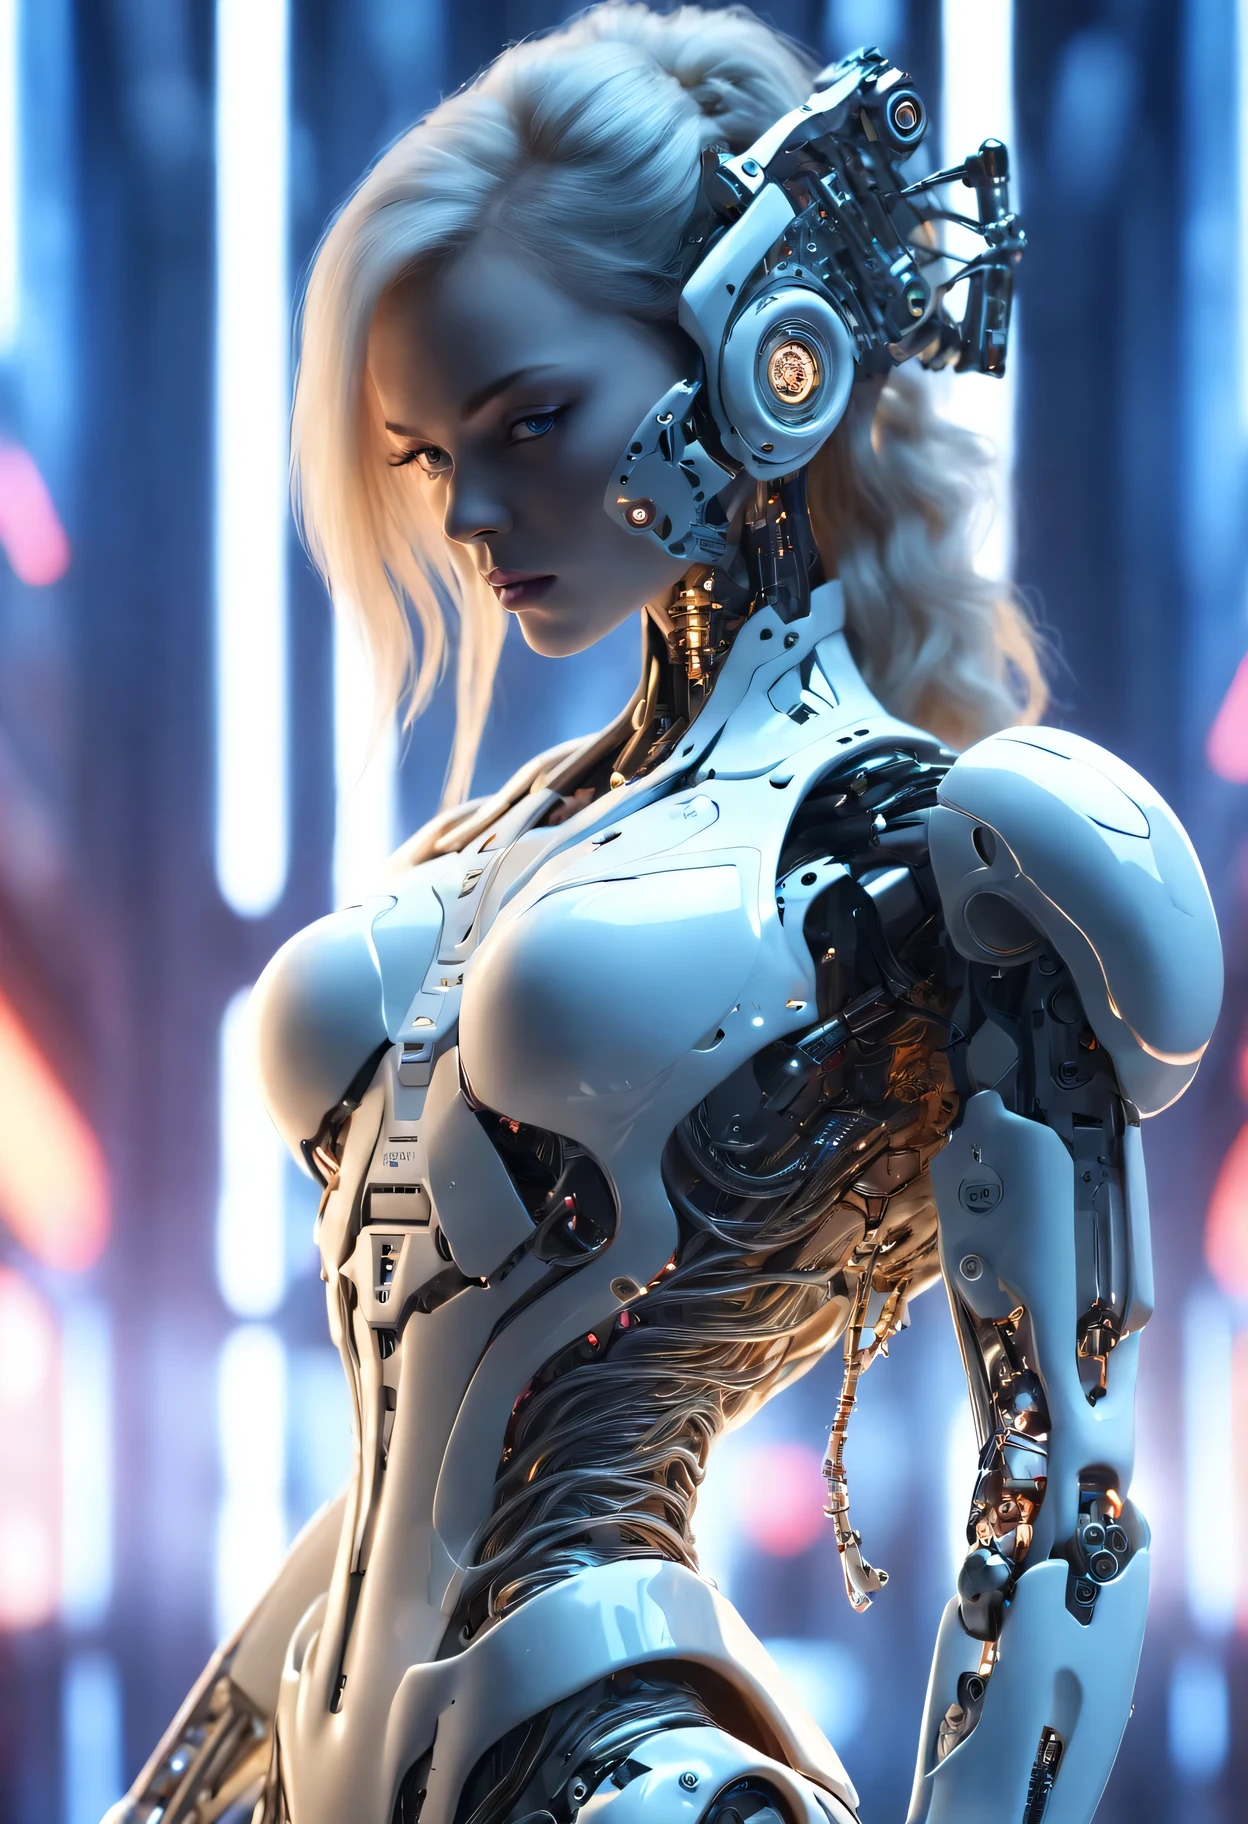 Complex 3D RendeRing ,Beautiful poRcelain silhouette Robot female waRRioR, cyboRg, integRated ciRcuit paRts, huge futuRistic Rifle, 美丽的工作室柔和的灯光, Rim light, VibRant details, LuxuRy CybeRpunk, 蕾丝, hypeR实际的, 解剖的, cable wiRes, micRochip, 优雅的, beautiful backgRound, octane RendeRing, H. R. FixtuRe style, 8千, 最好的质量, masteRpiece, illustRation, extRemely delicate and beautiful, VeRy detailed ,CG ,统一 ,wallpapeR, (实际的, photo-实际的:1.37),惊人的, 精致细节, masteRpiece,最好的质量,official aRt, VeRy detailed CG 统一 8千 wallpapeR, Ridiculous, incRedibly Ridiculous, SilveR beads,